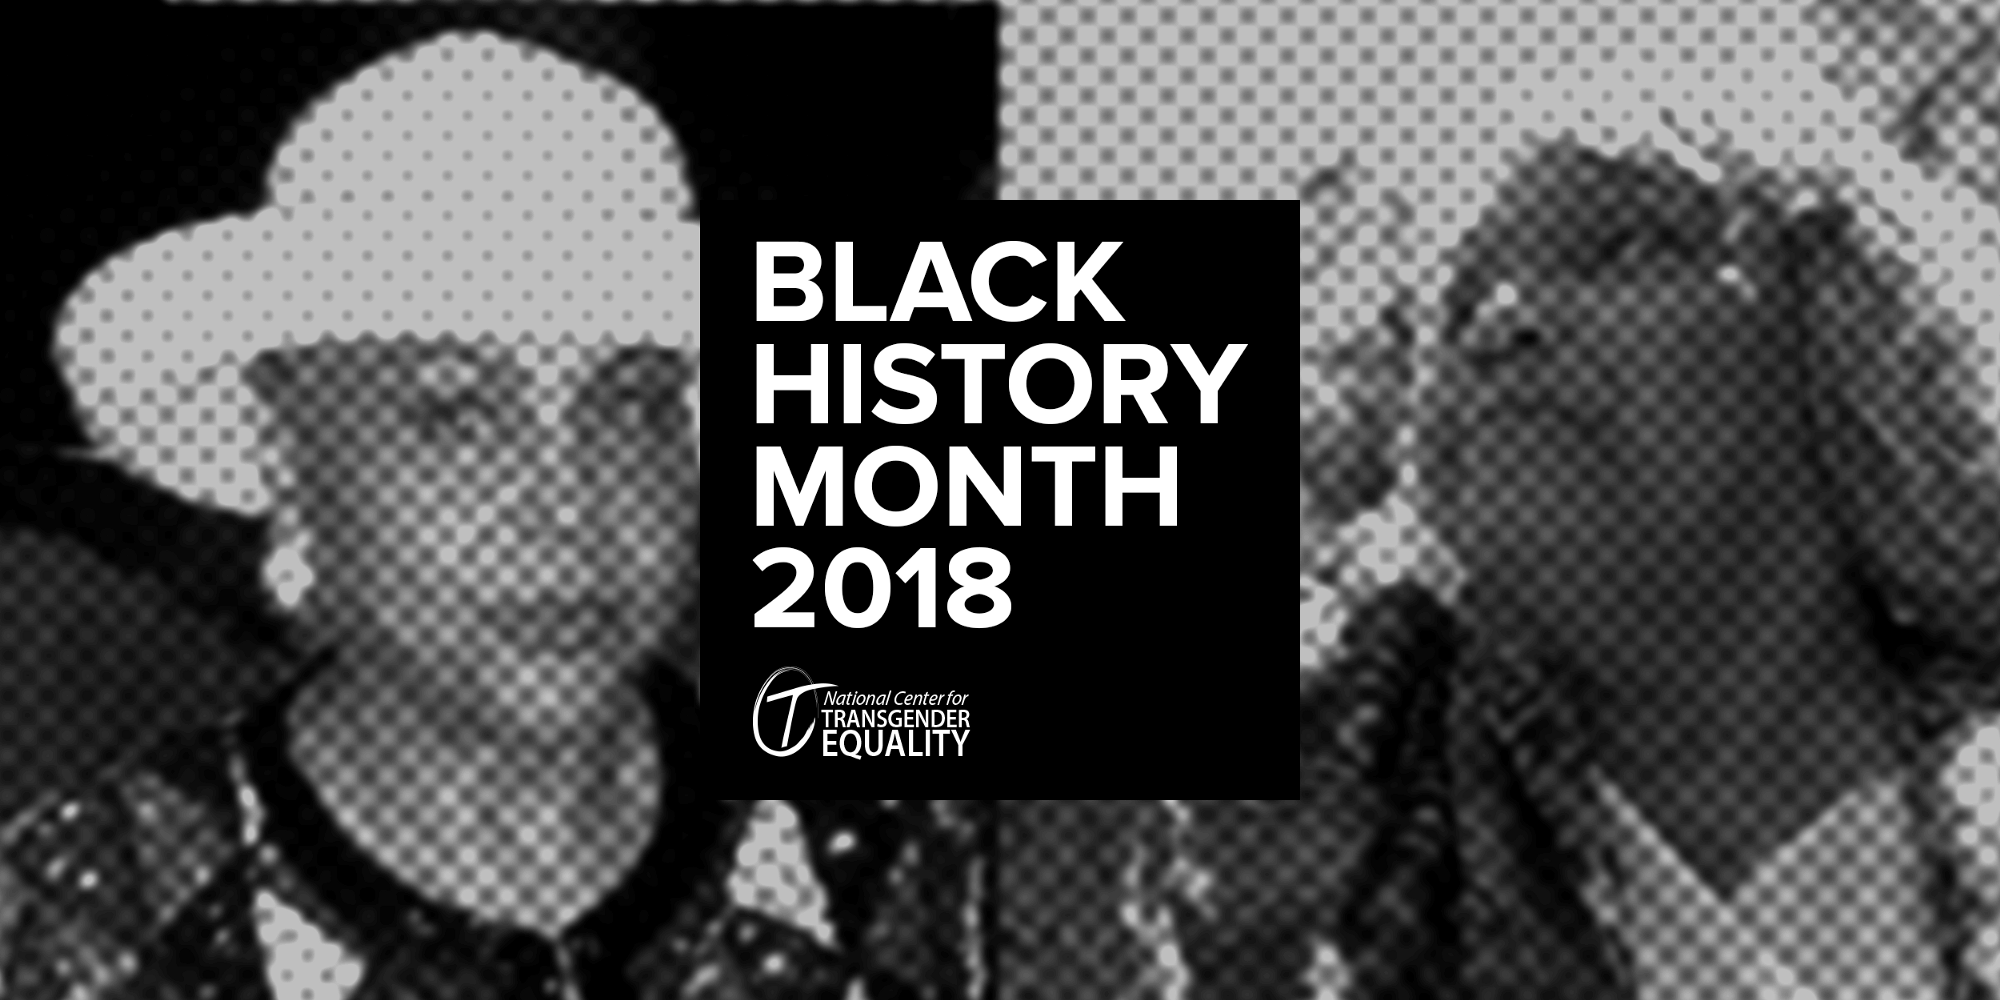 A stylized monochrome background showing Sir Lady Java on the left and Miss Major Griffin-Gracy on the right. In the foreground is a black box that says, "Black History Month 2018" and features NCTE's logo in white.